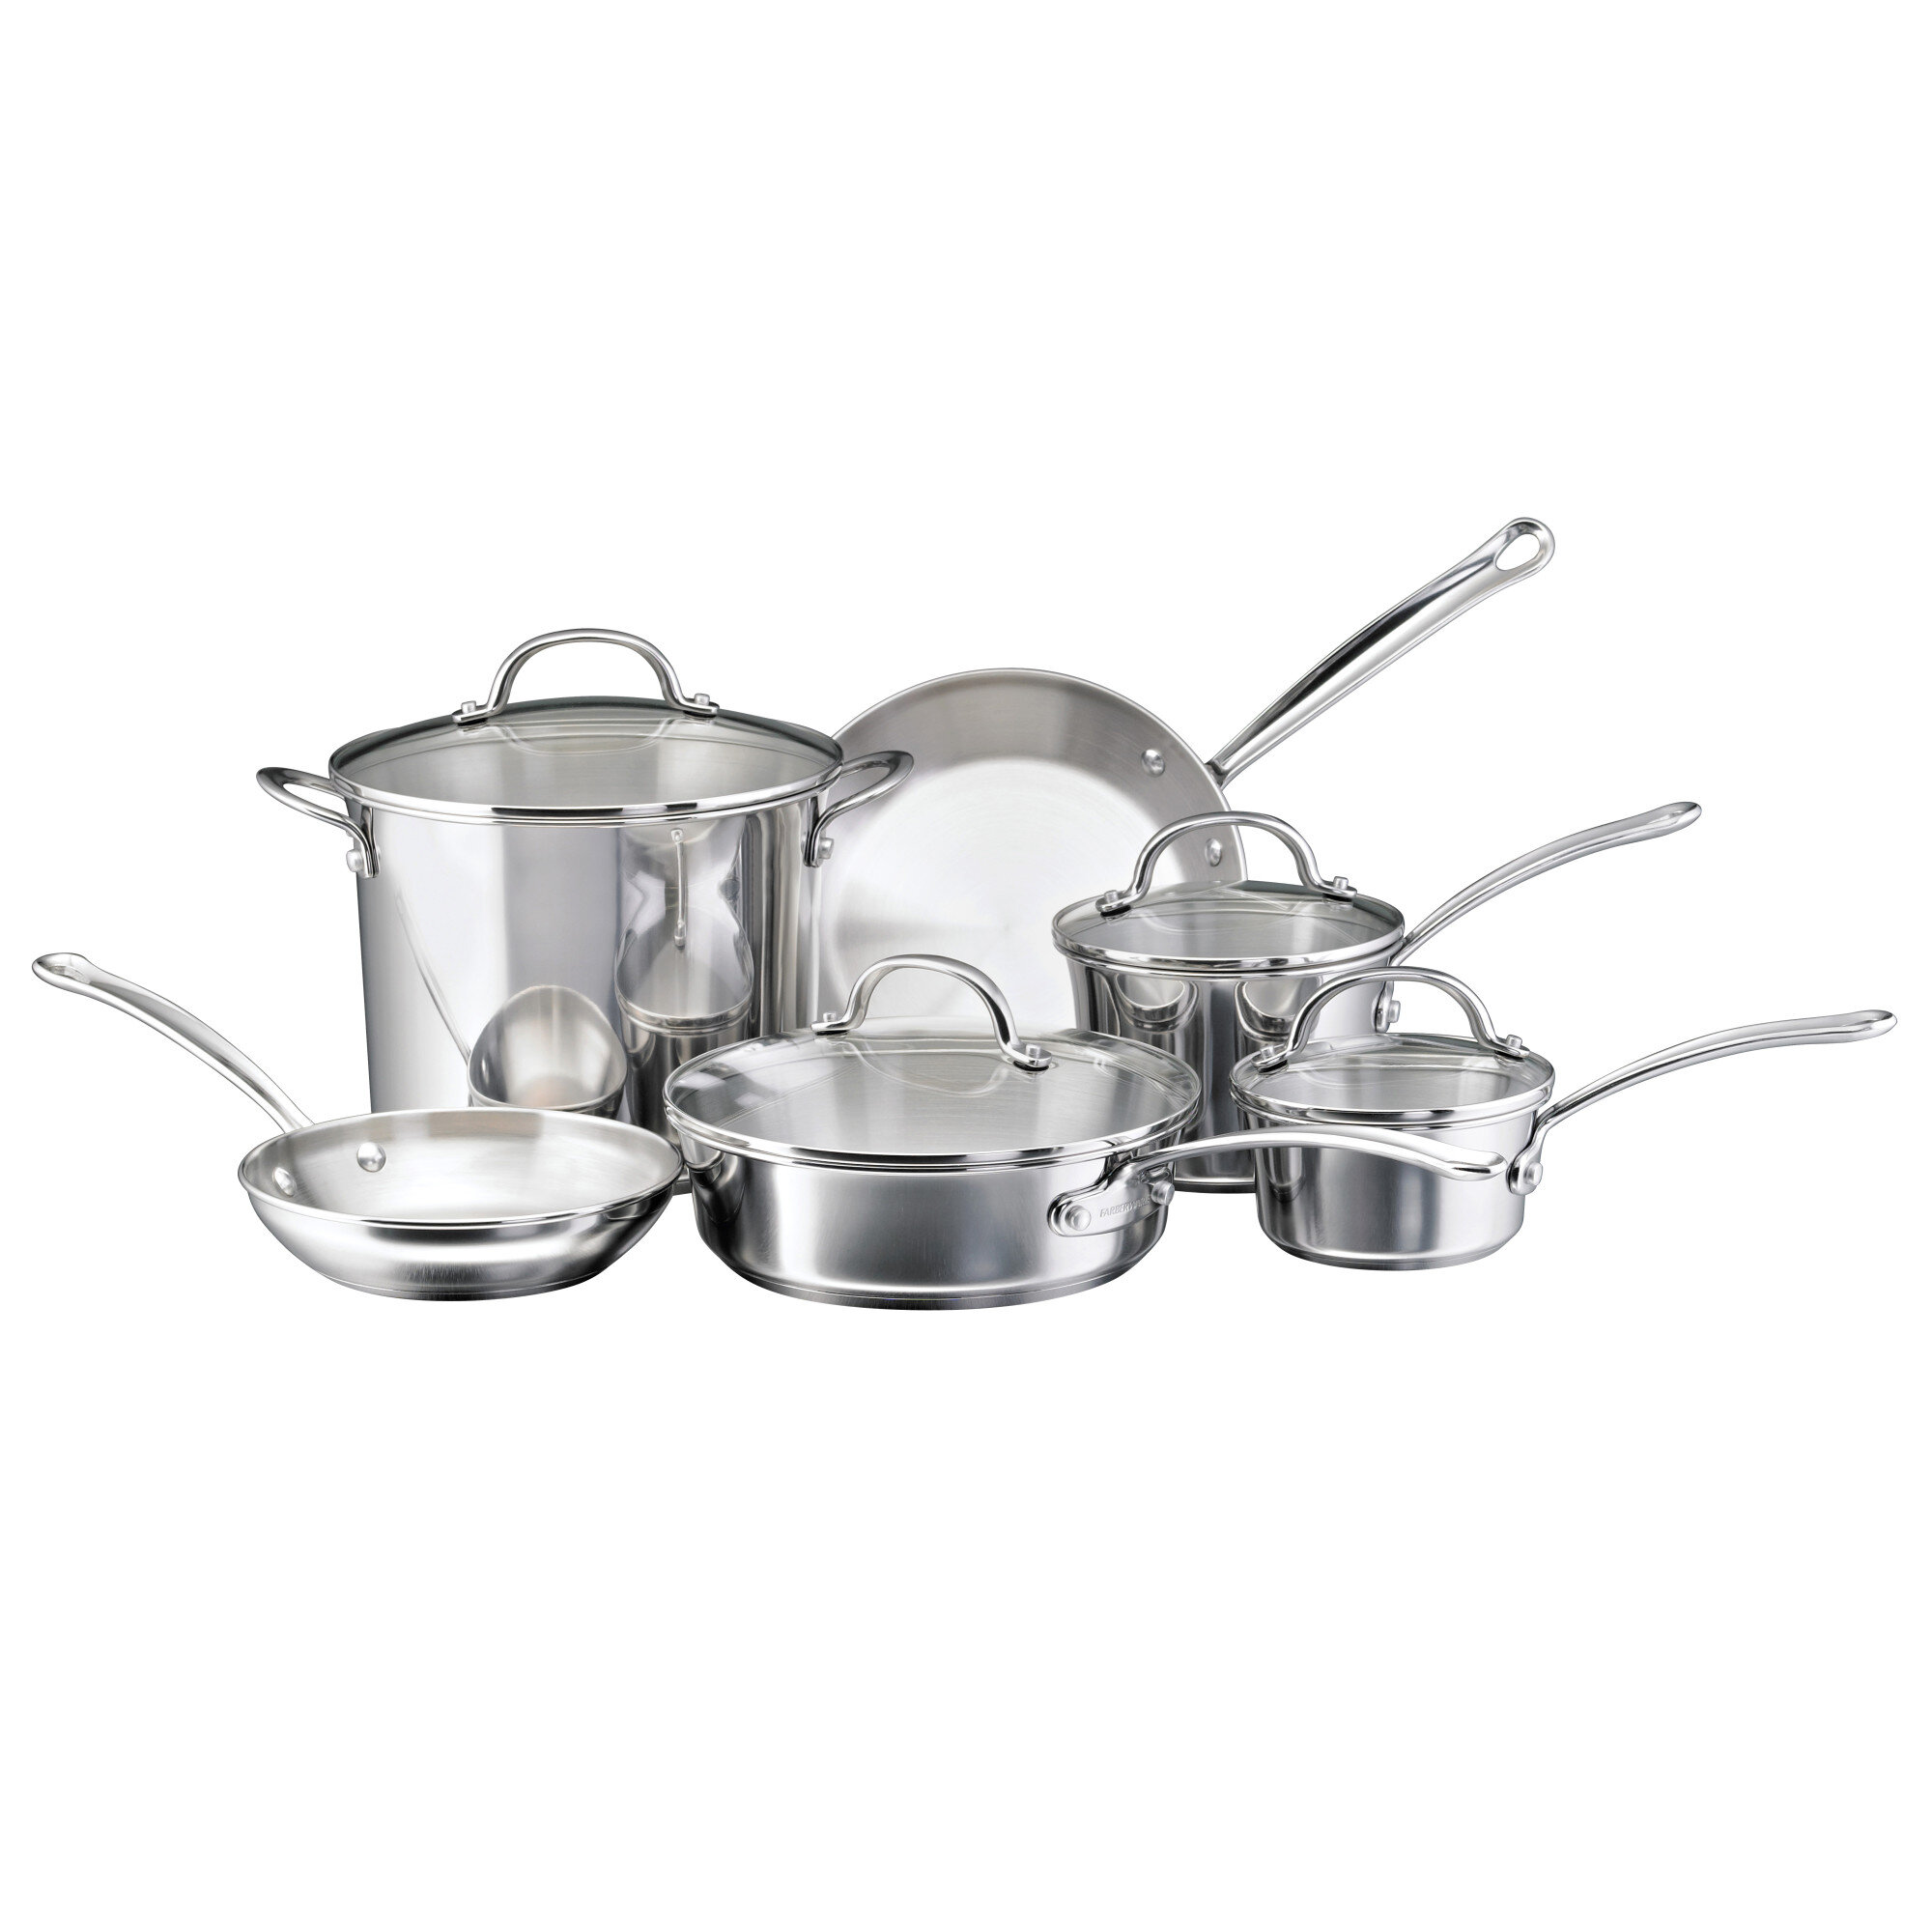 Farberware Cookware Pots and Pans Set, 8 - pc.